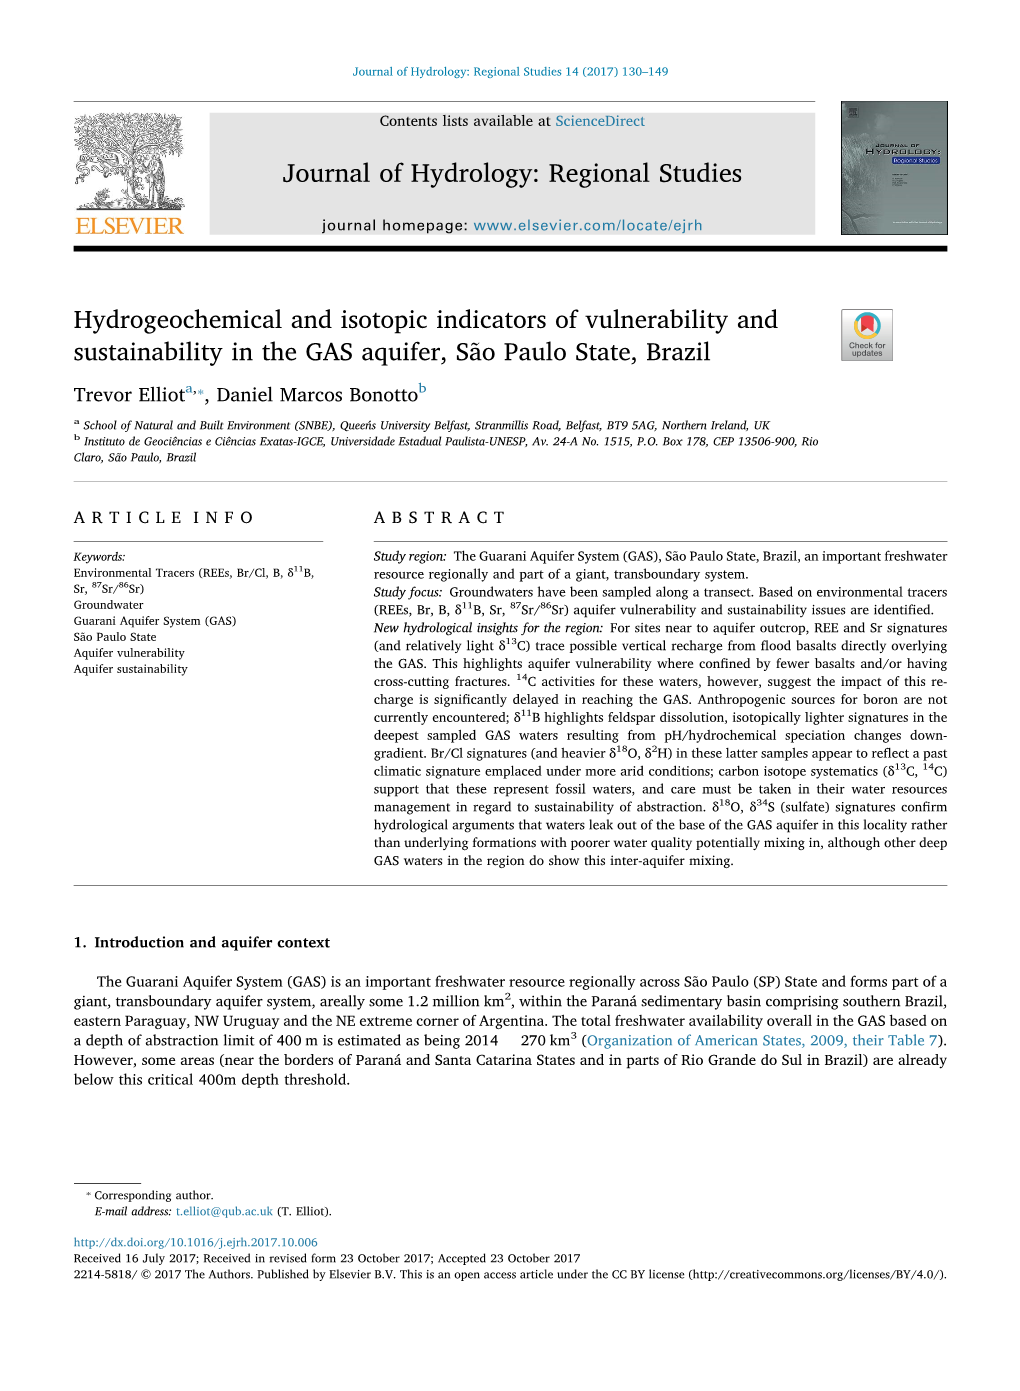 Hydrogeochemical and Isotopic Indicators of Vulnerability and Sustainability in the GAS Aquifer, São Paulo State, Brazil T